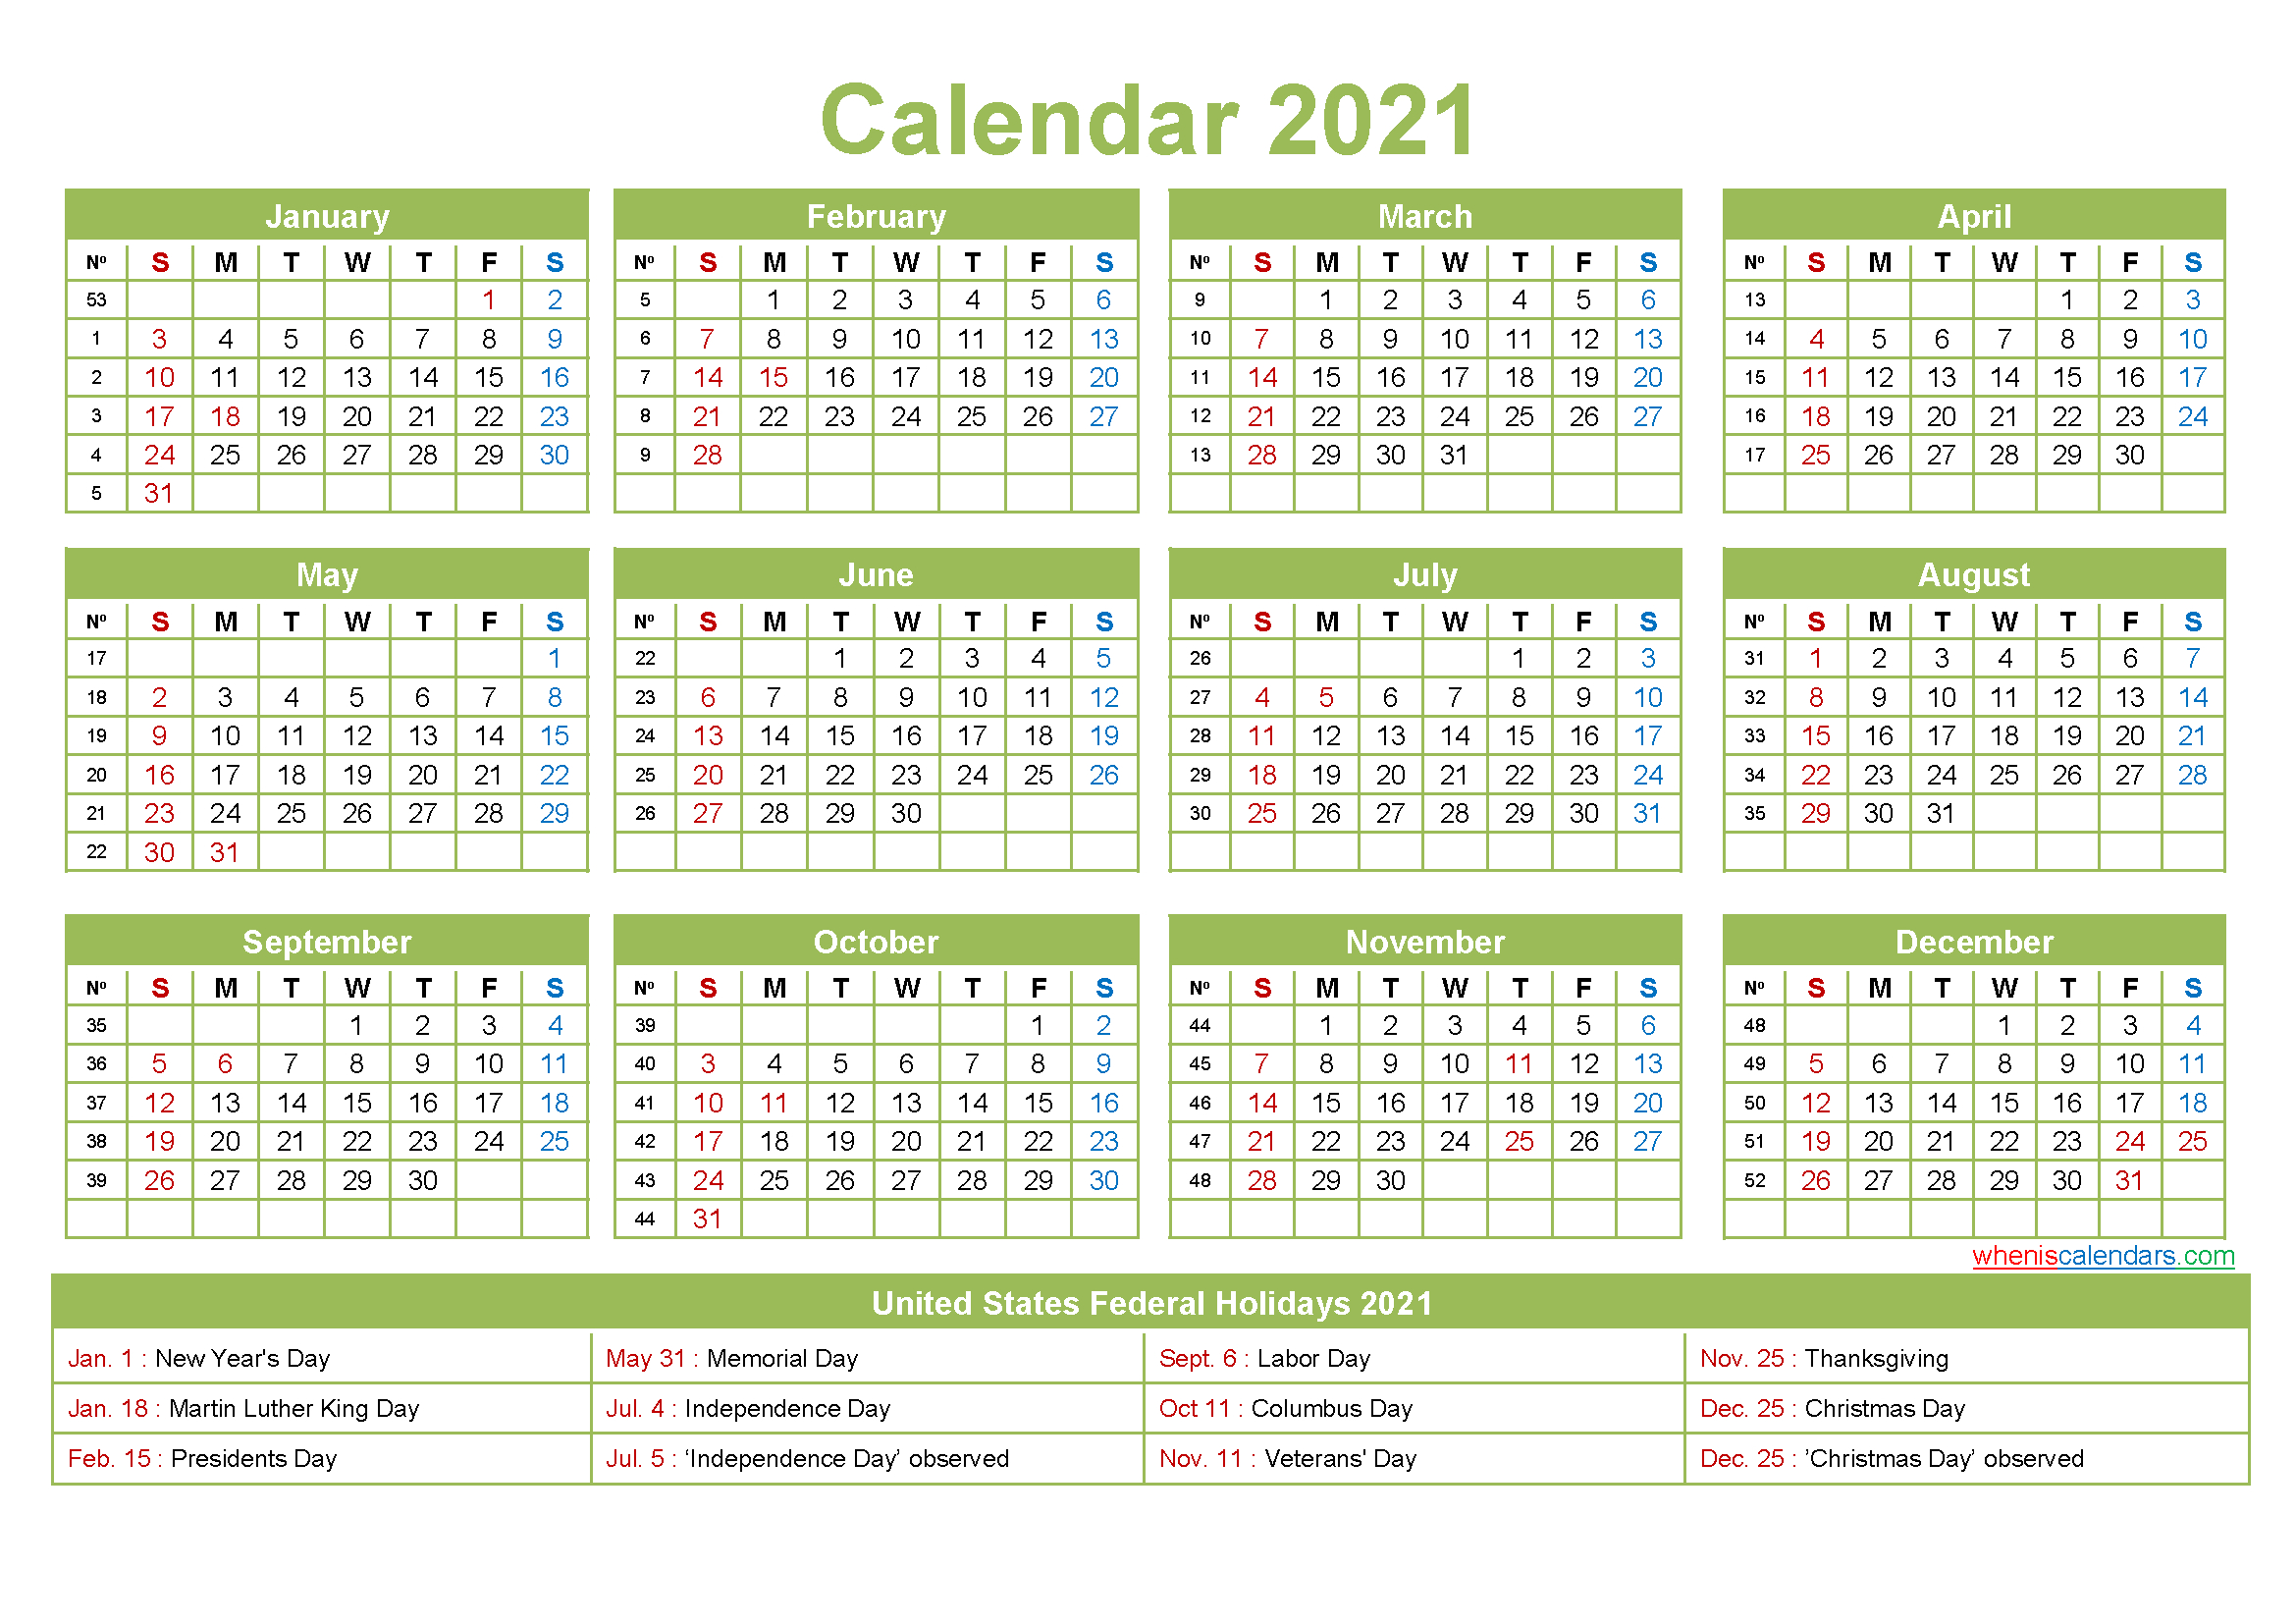 Free Yearly 2021 Calendar With Holidays Word, Pdf - Free-2021 2021 Yearly Calendar Printable Free Pdf